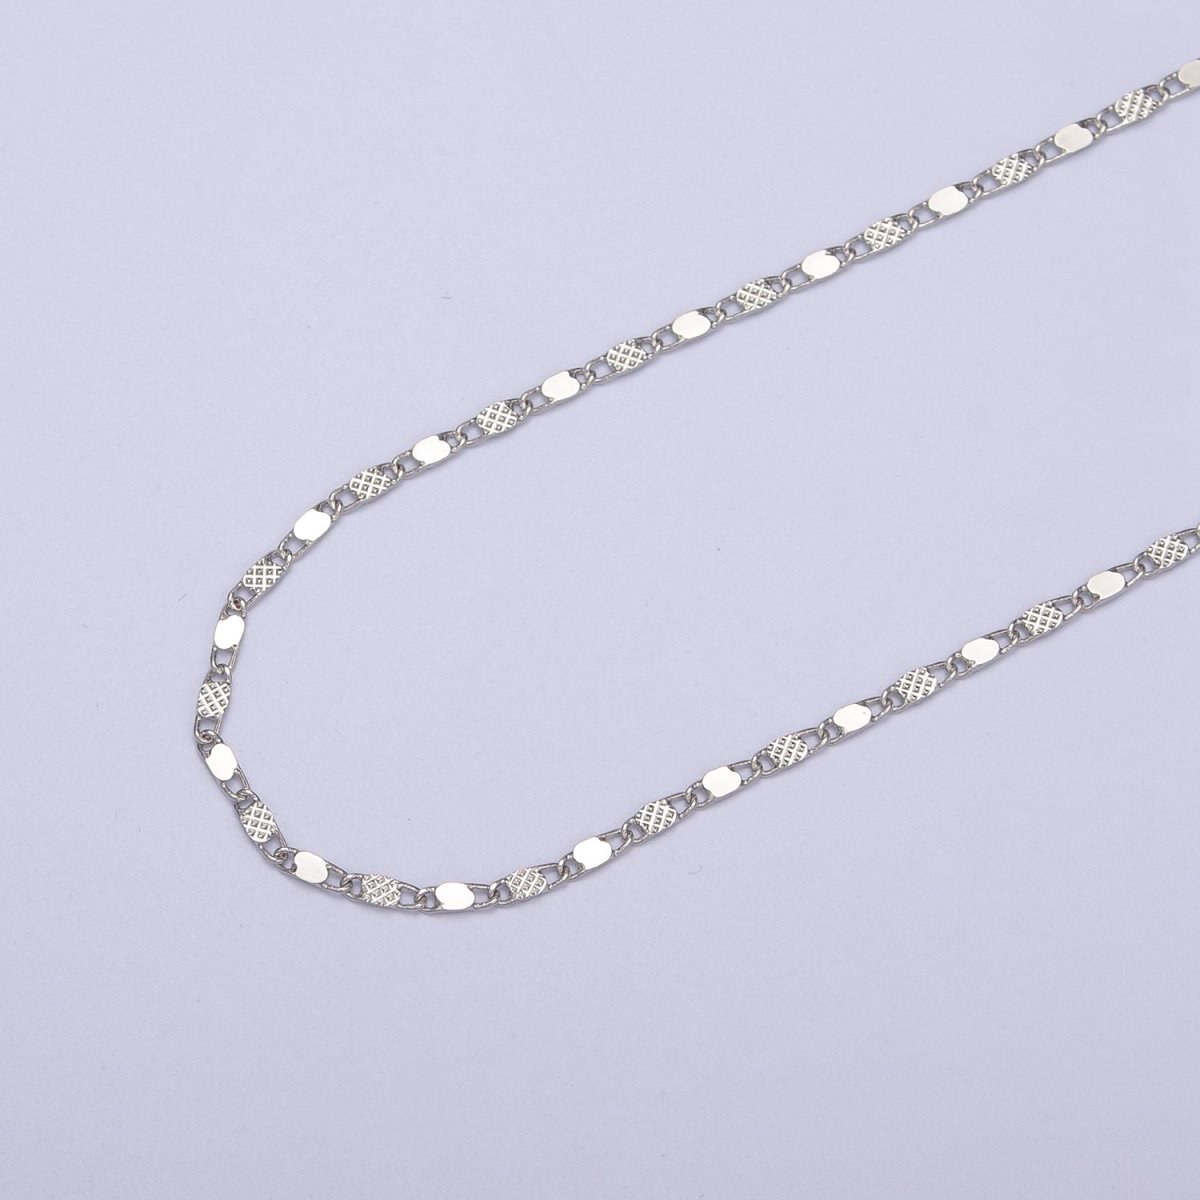 24K Gold Filled Sunburst Flat Bar Unique Chain by Yard, Dainty 1.7mm Wholesale Chain in Silver & Gold For Jewelry Making Supply Component| ROLL-638, ROLL-637 Clearance Pricing - DLUXCA